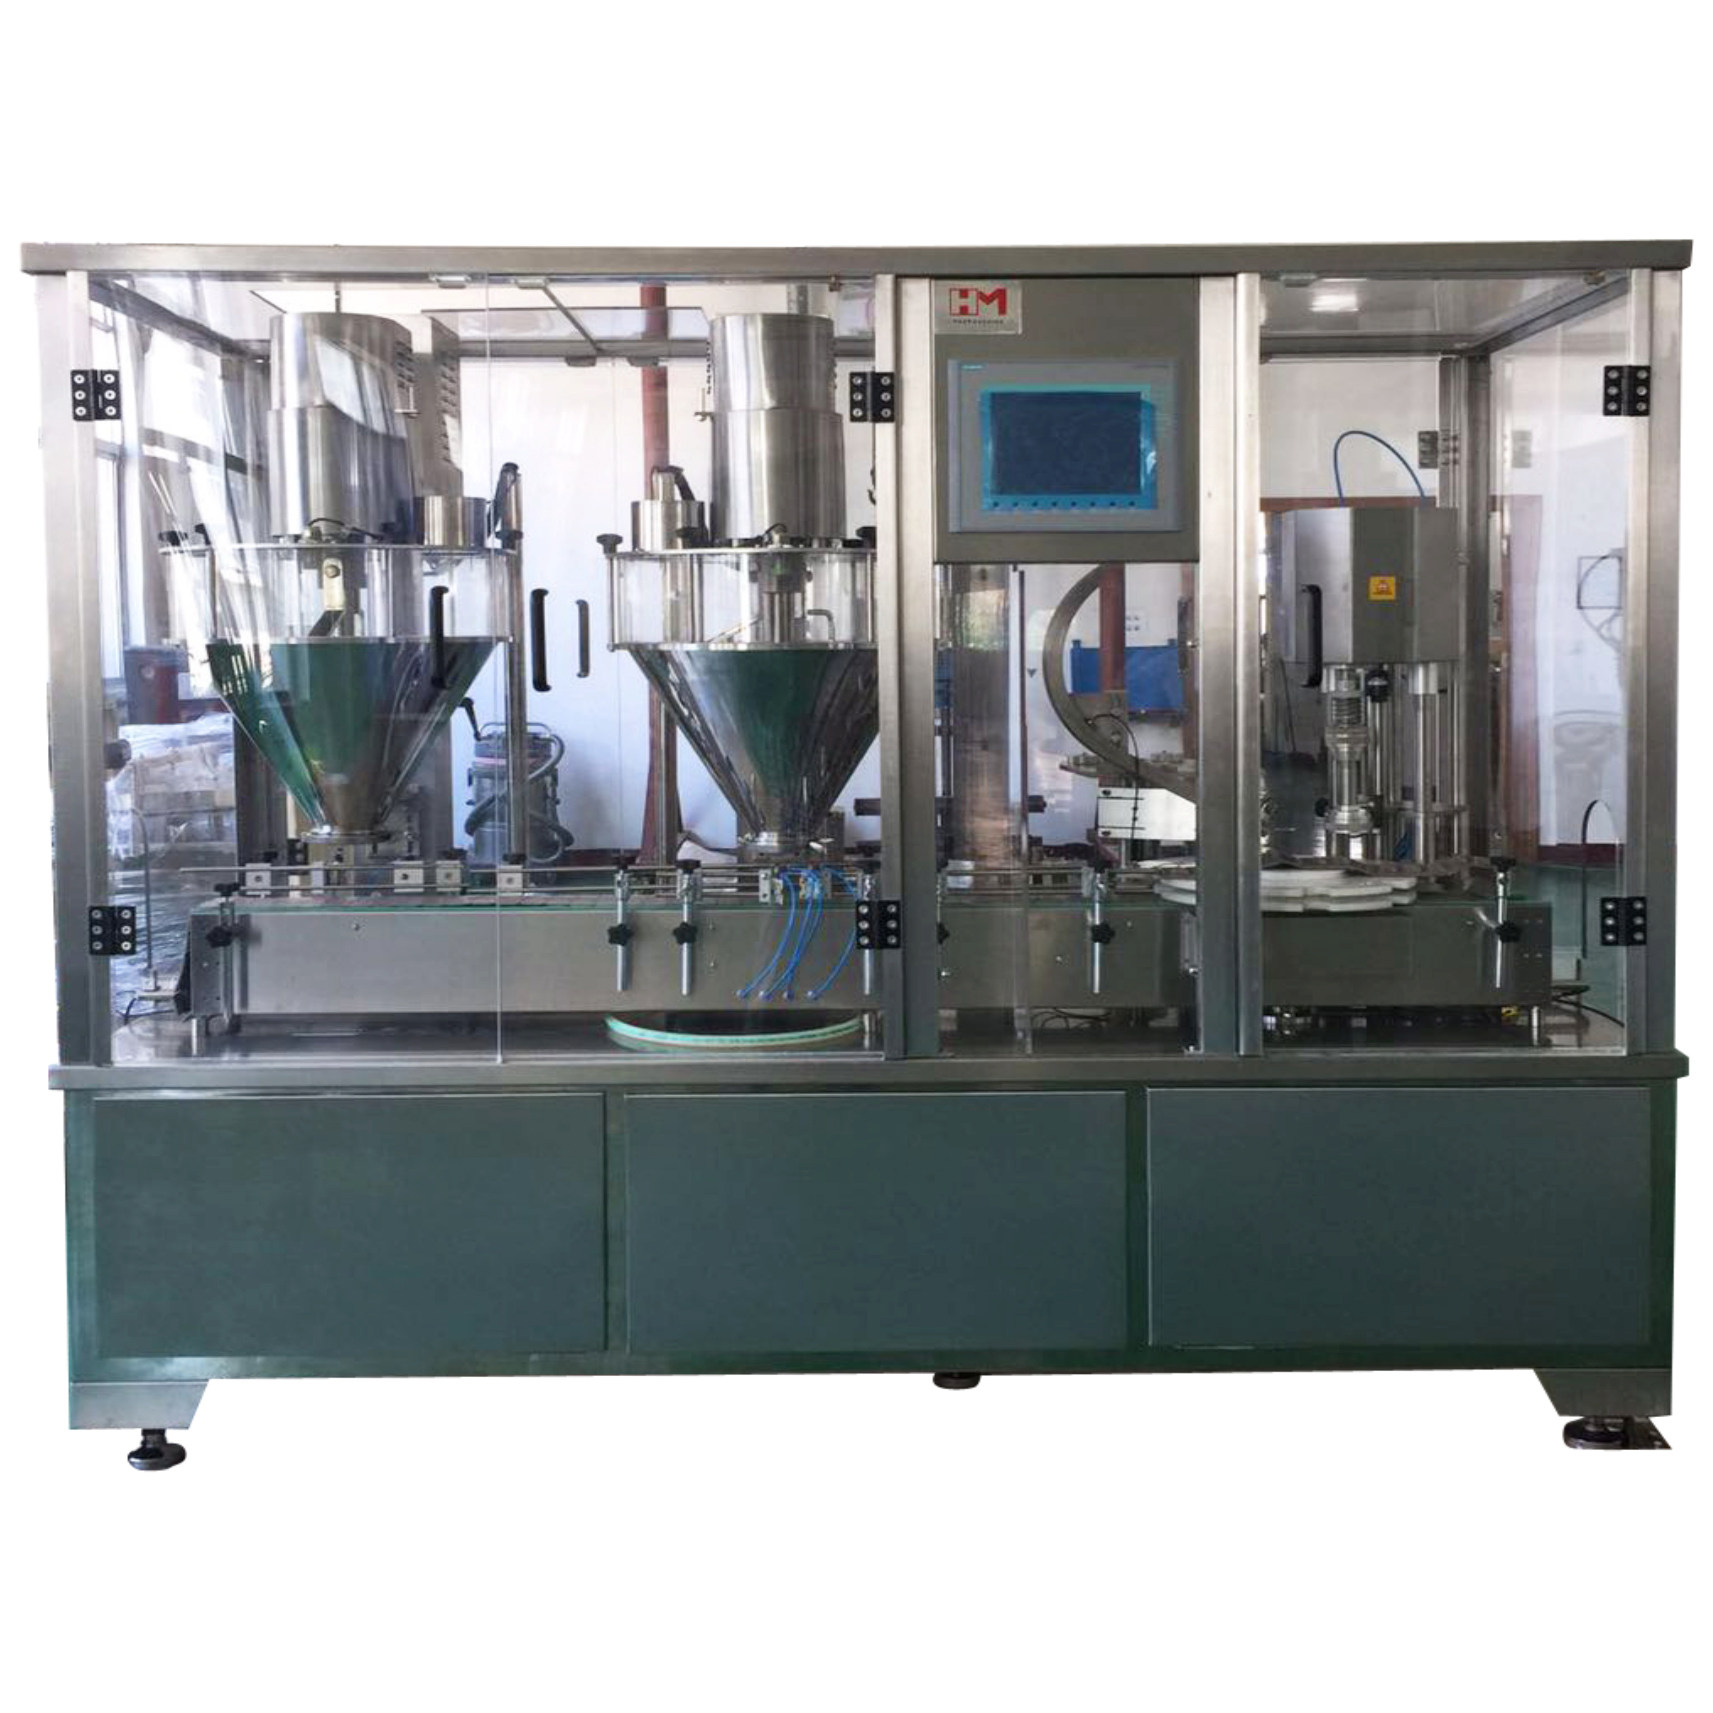 HM DSP Series Automatic Powder Filling and Sealing machine